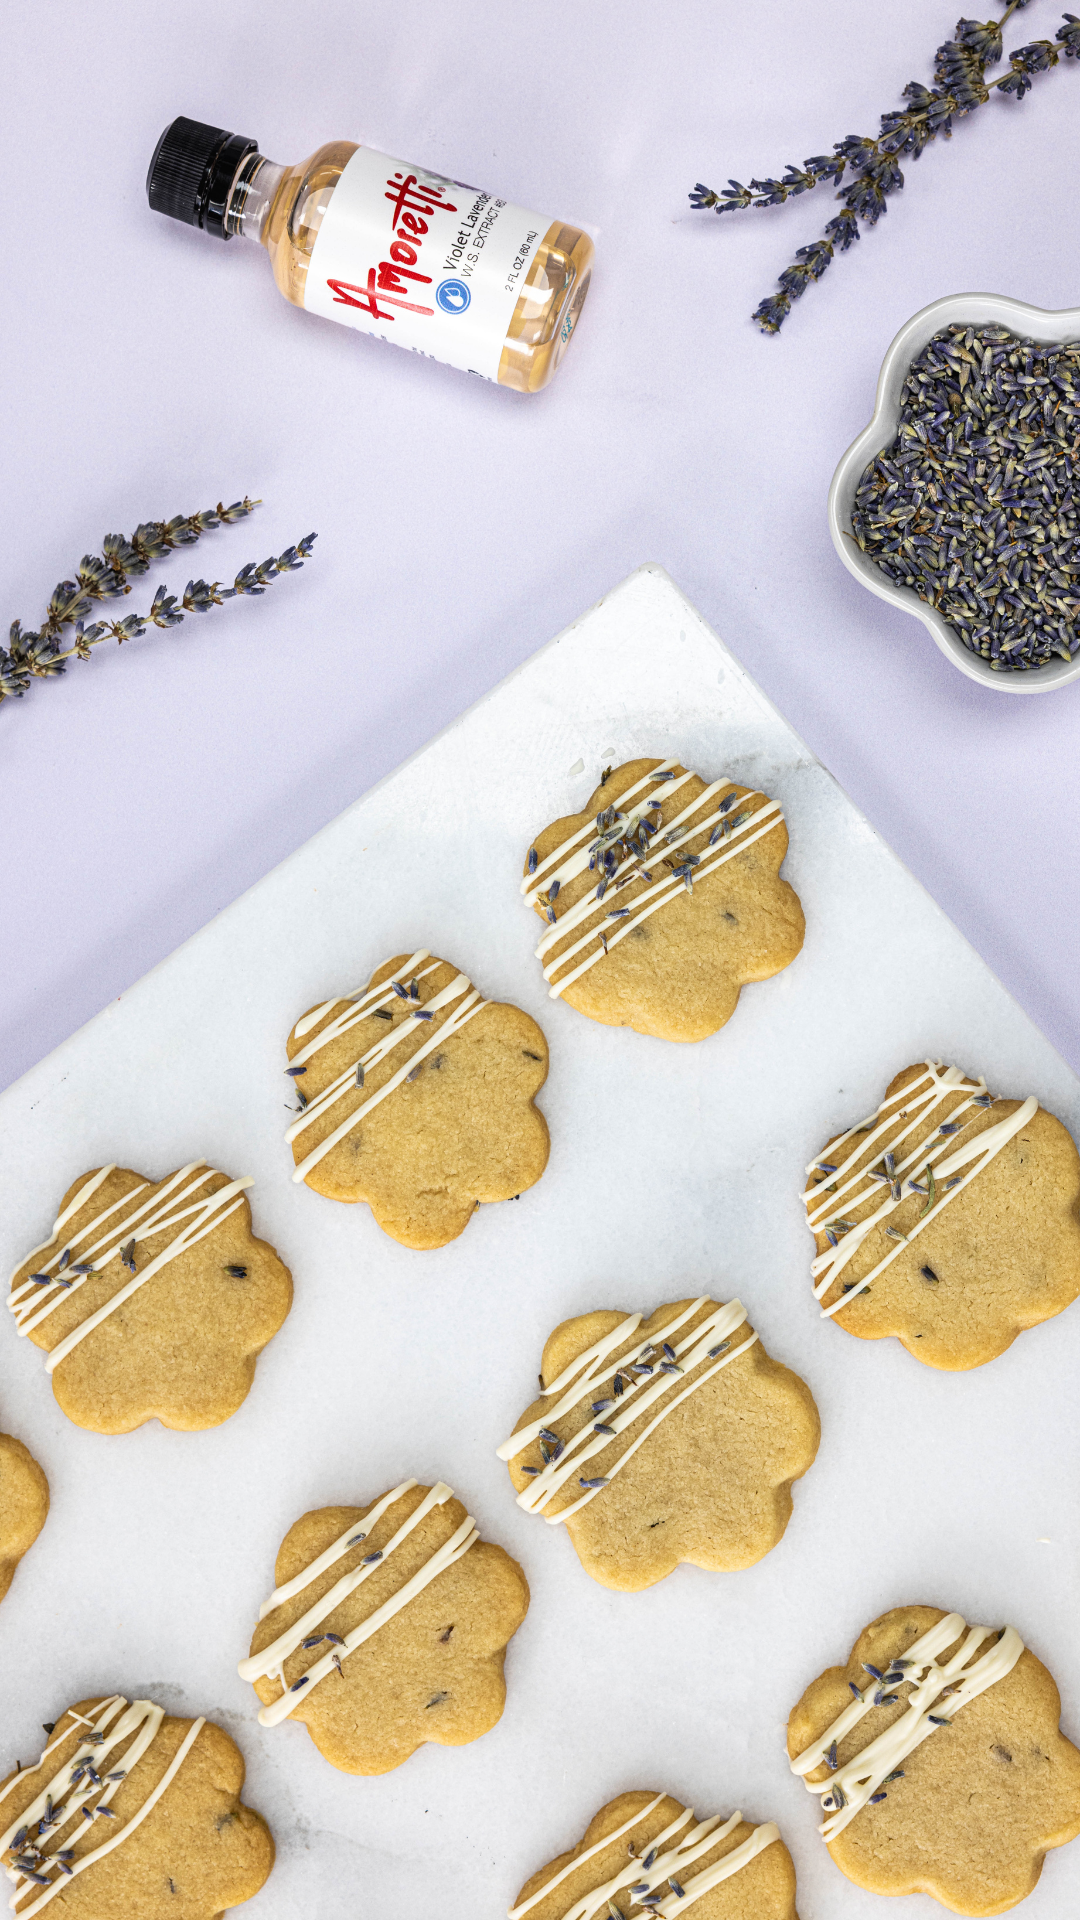 Lavender Honey Shortbread Cookies made with Amoretti Violet Lavender Extract Water Soluble surrounded by dried lavender